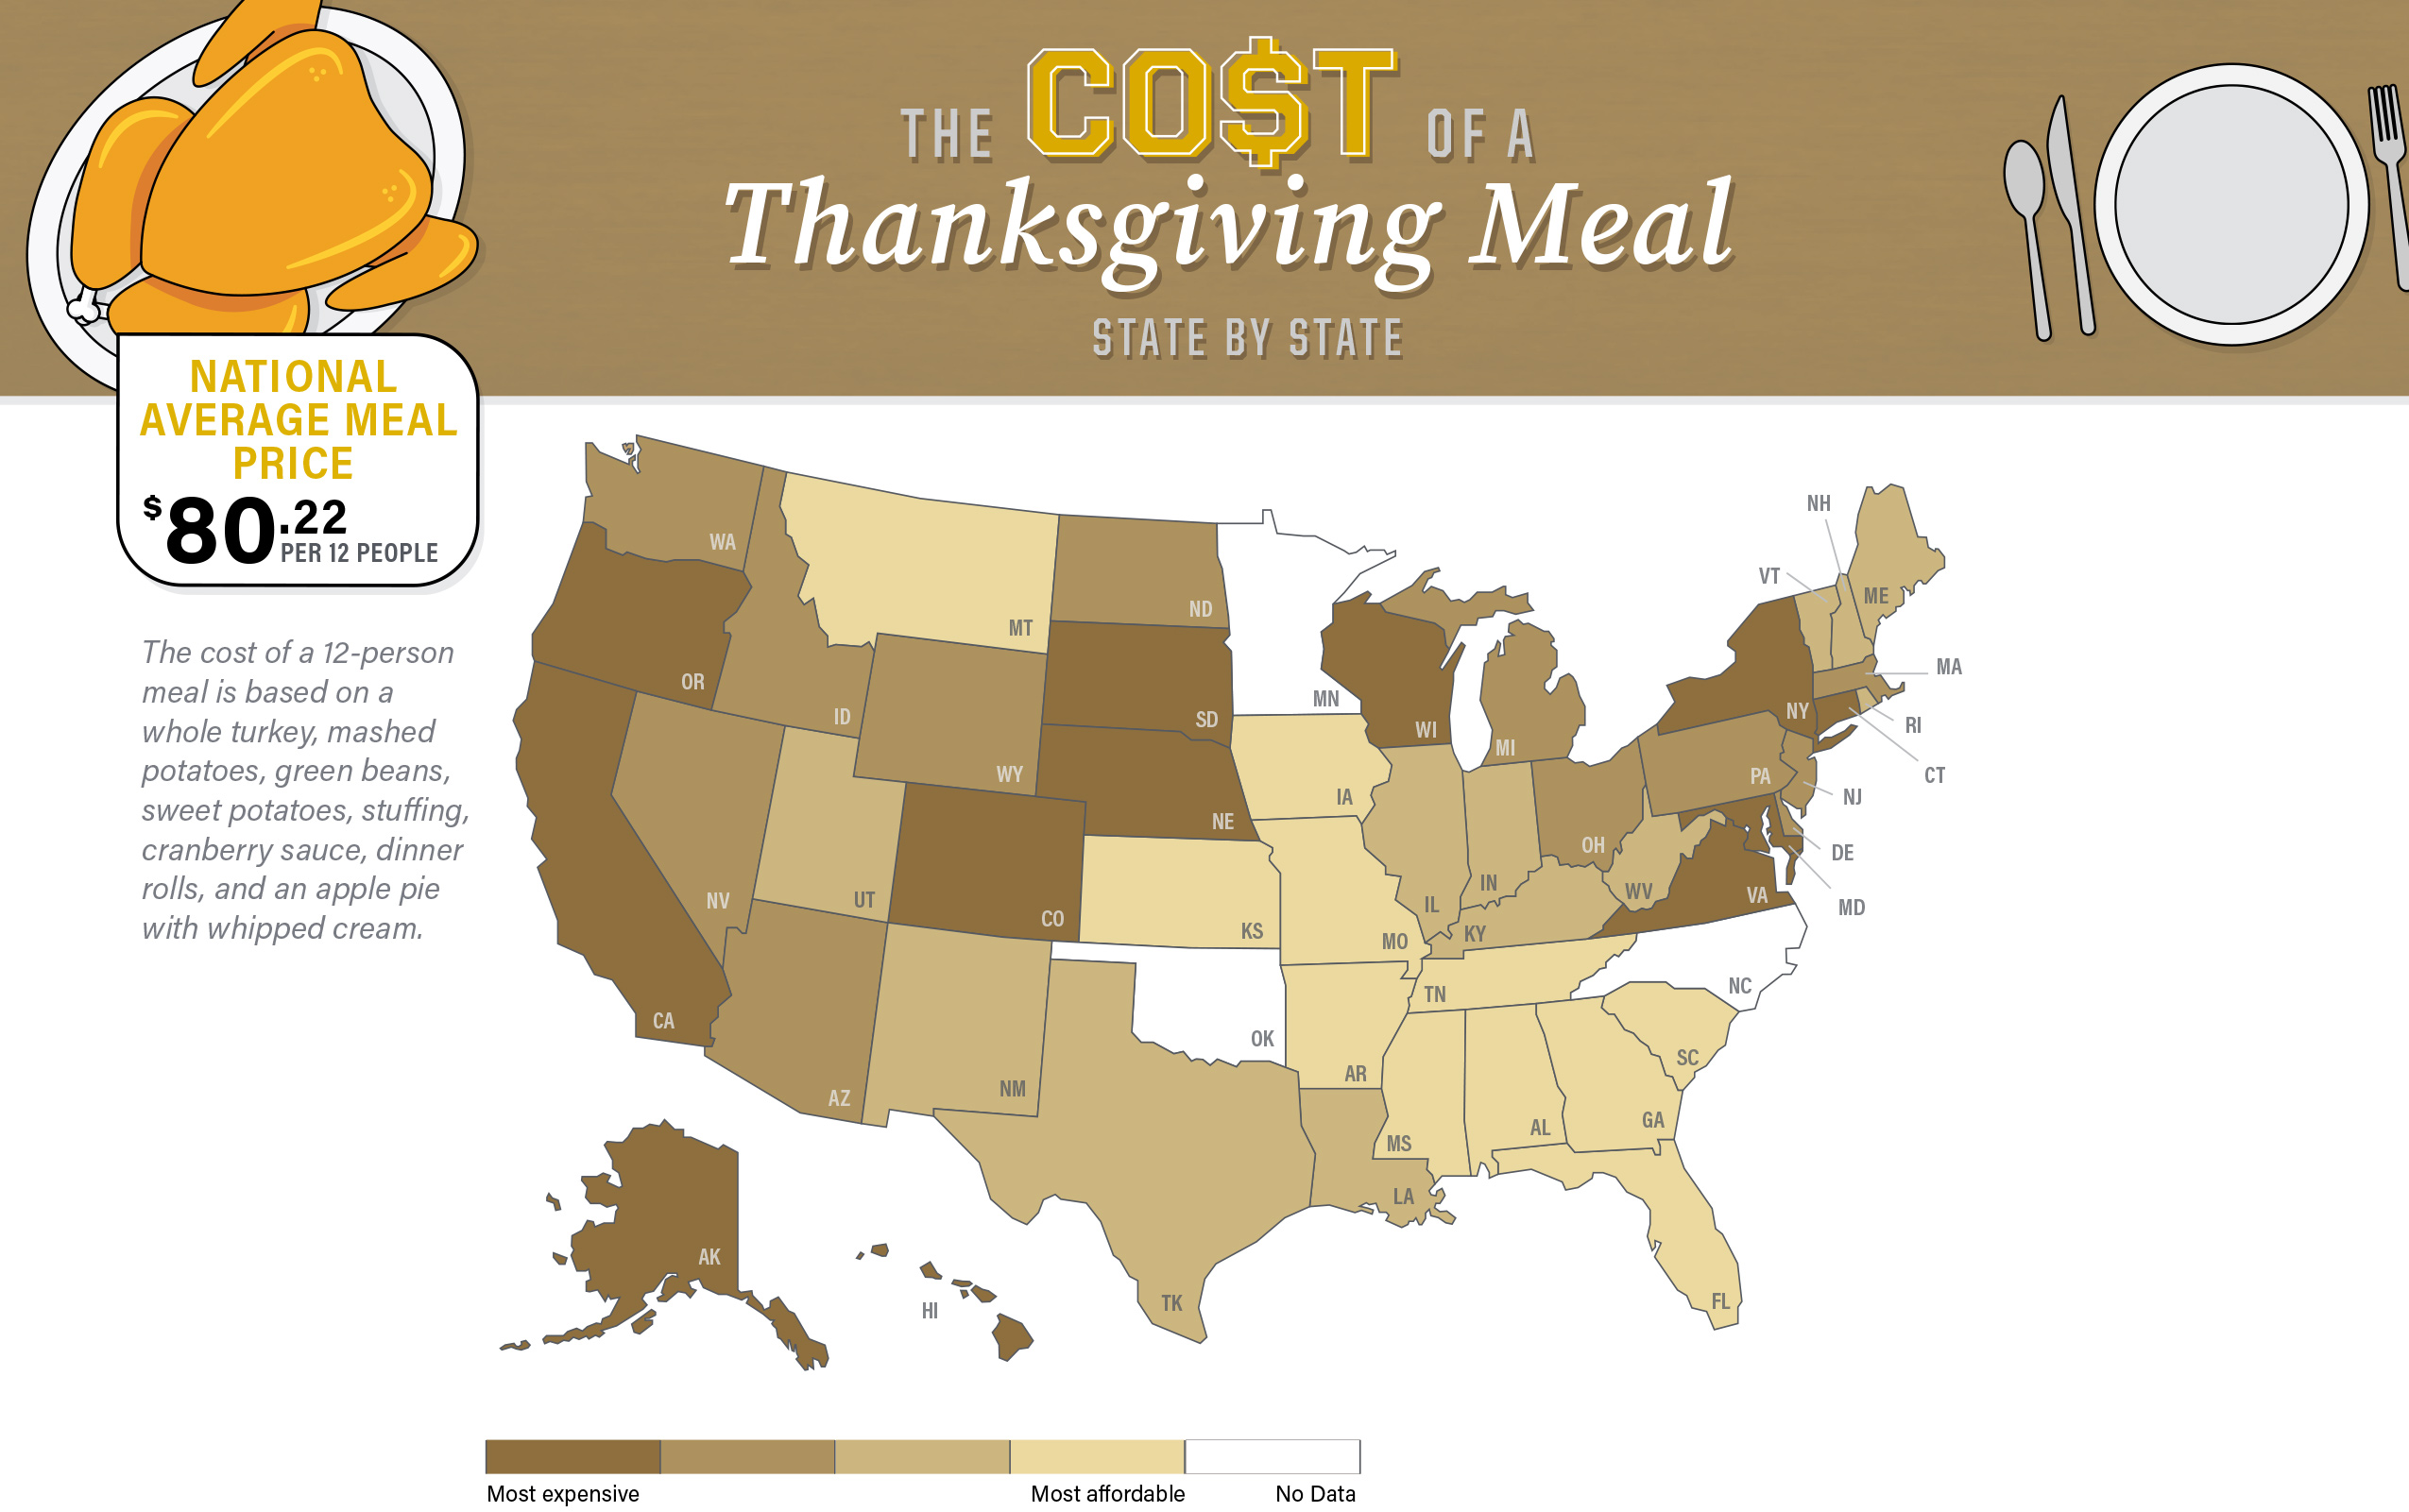 United State Graphic with information about the cost of a Thanksgiving Meal. The cost of a 12-person meal is based on a whole turkey, mashed potatoes, green beans, sweet potatoes, stuffing, cranberry sauce, dinner rolls, and an apple pie with whipped cream.